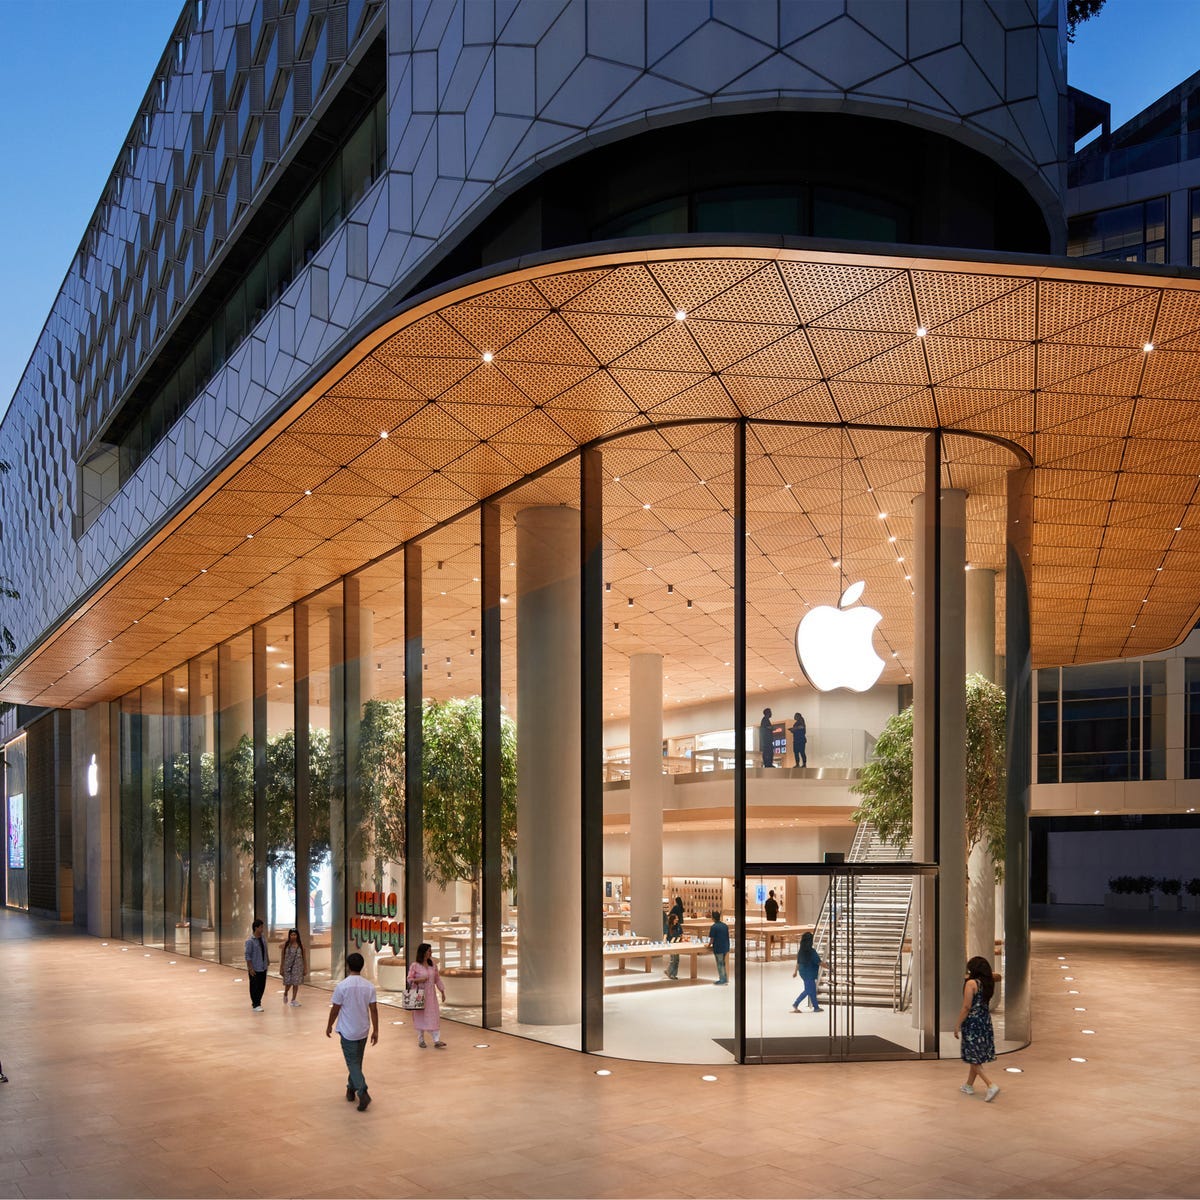 Apple's India Stores Highlight Its Ambitions in the Country - CNET